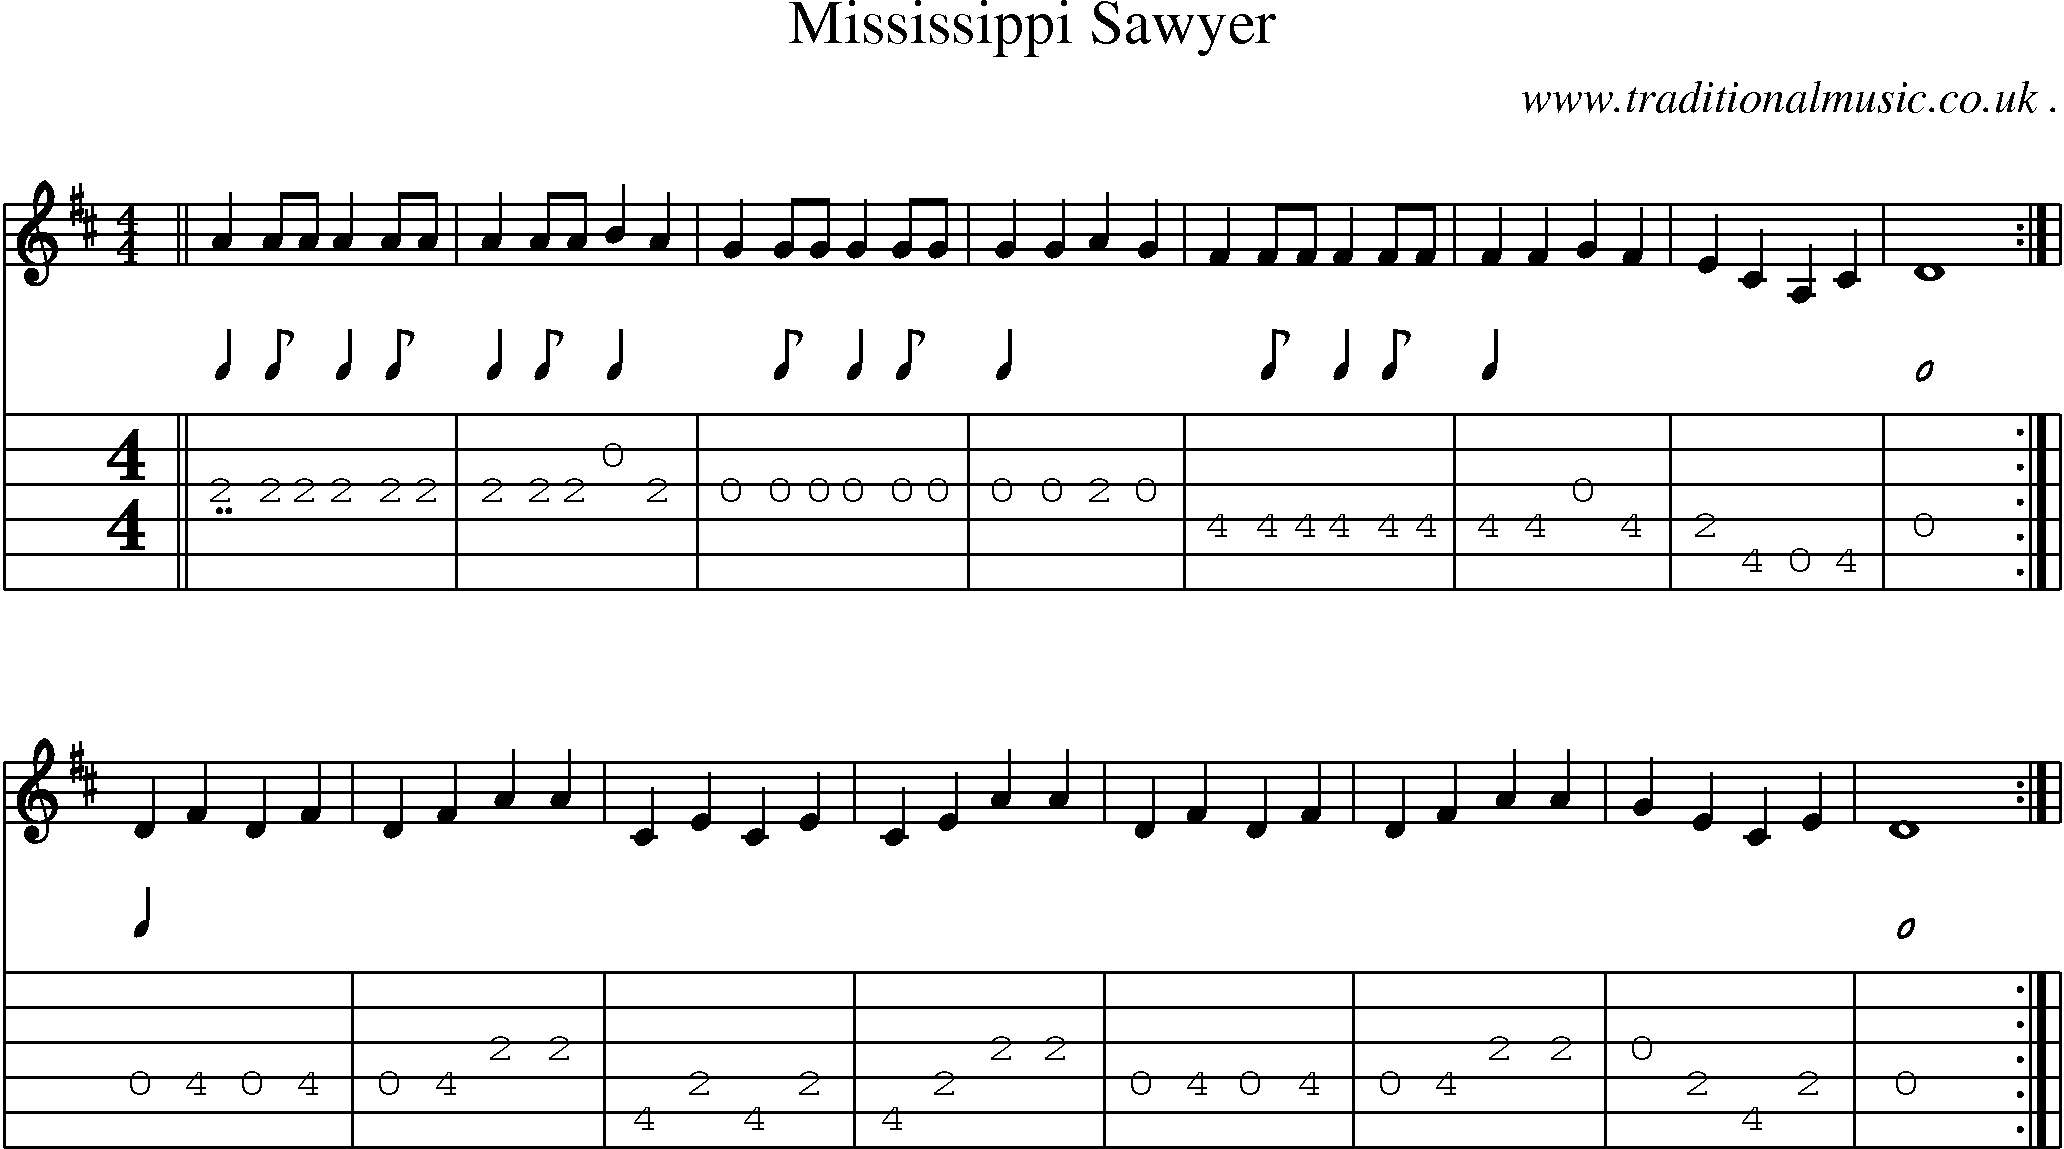 Music Score and Guitar Tabs for Mississippi Sawyer